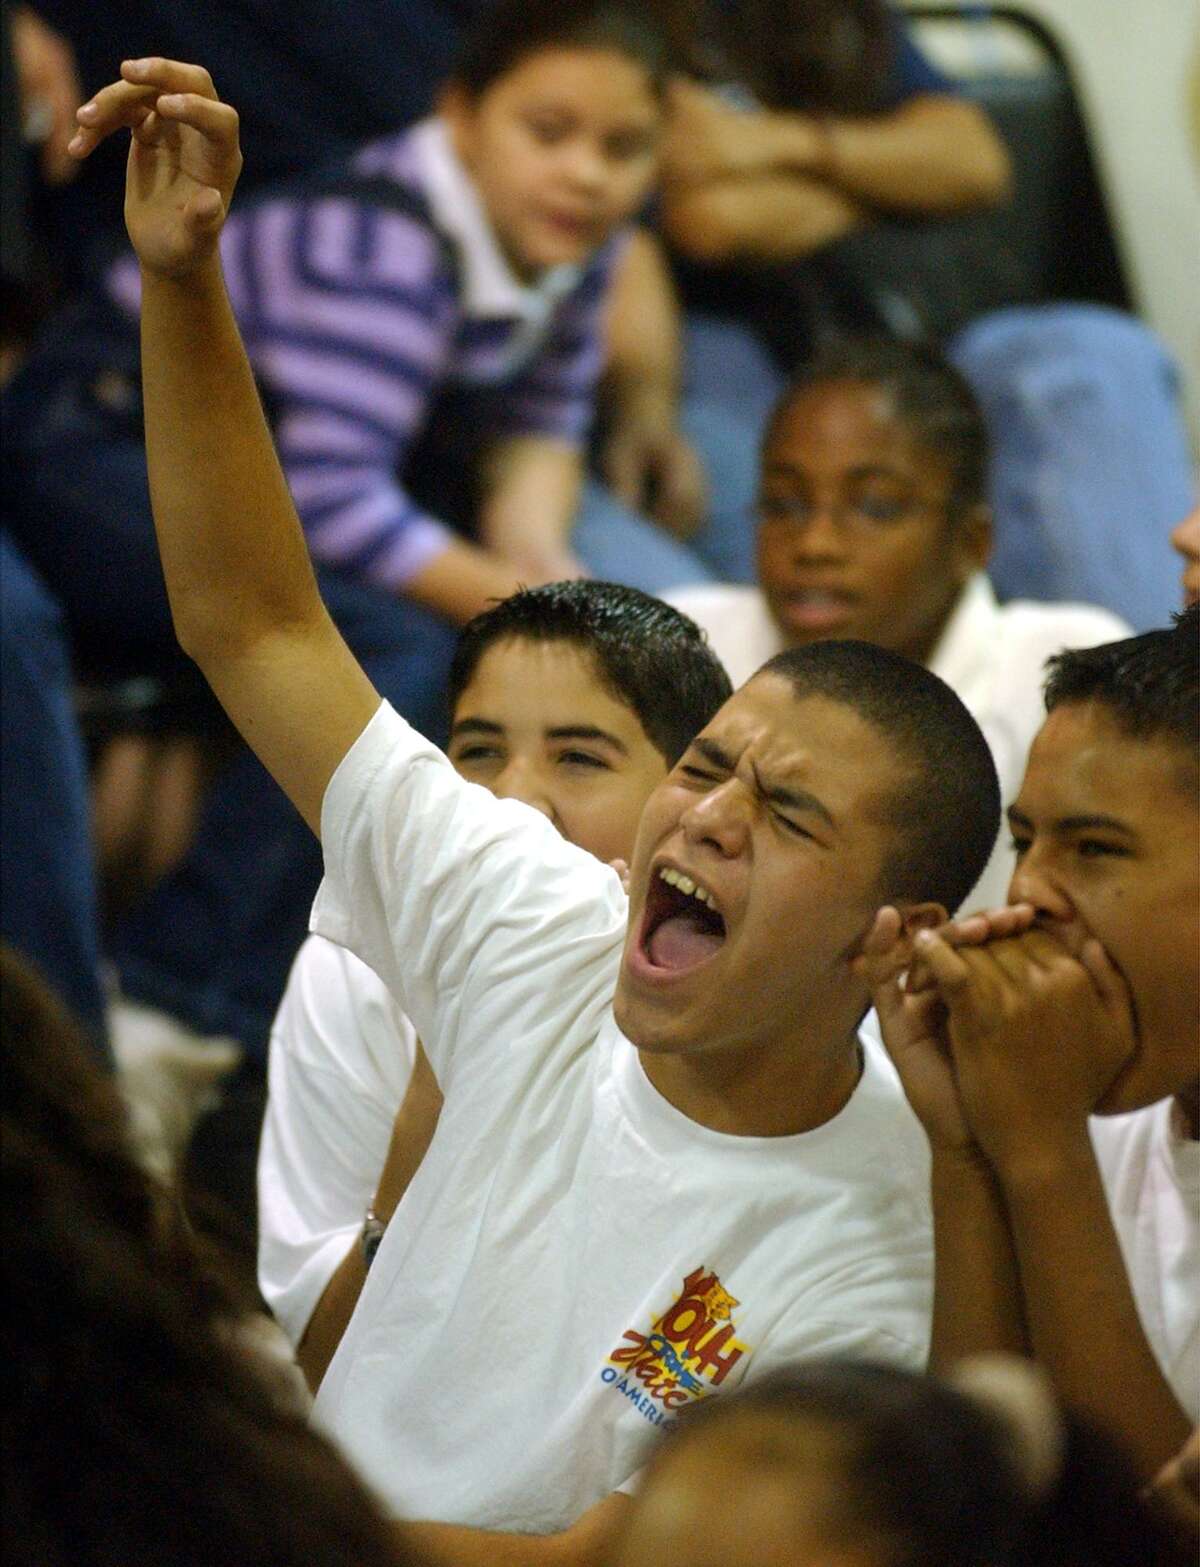 In recent years, the United Way of San Antonio has focused its efforts on education, family support and safety net initiatives. Here, students participate in a anti-drug initiative sponsored by the United Way.